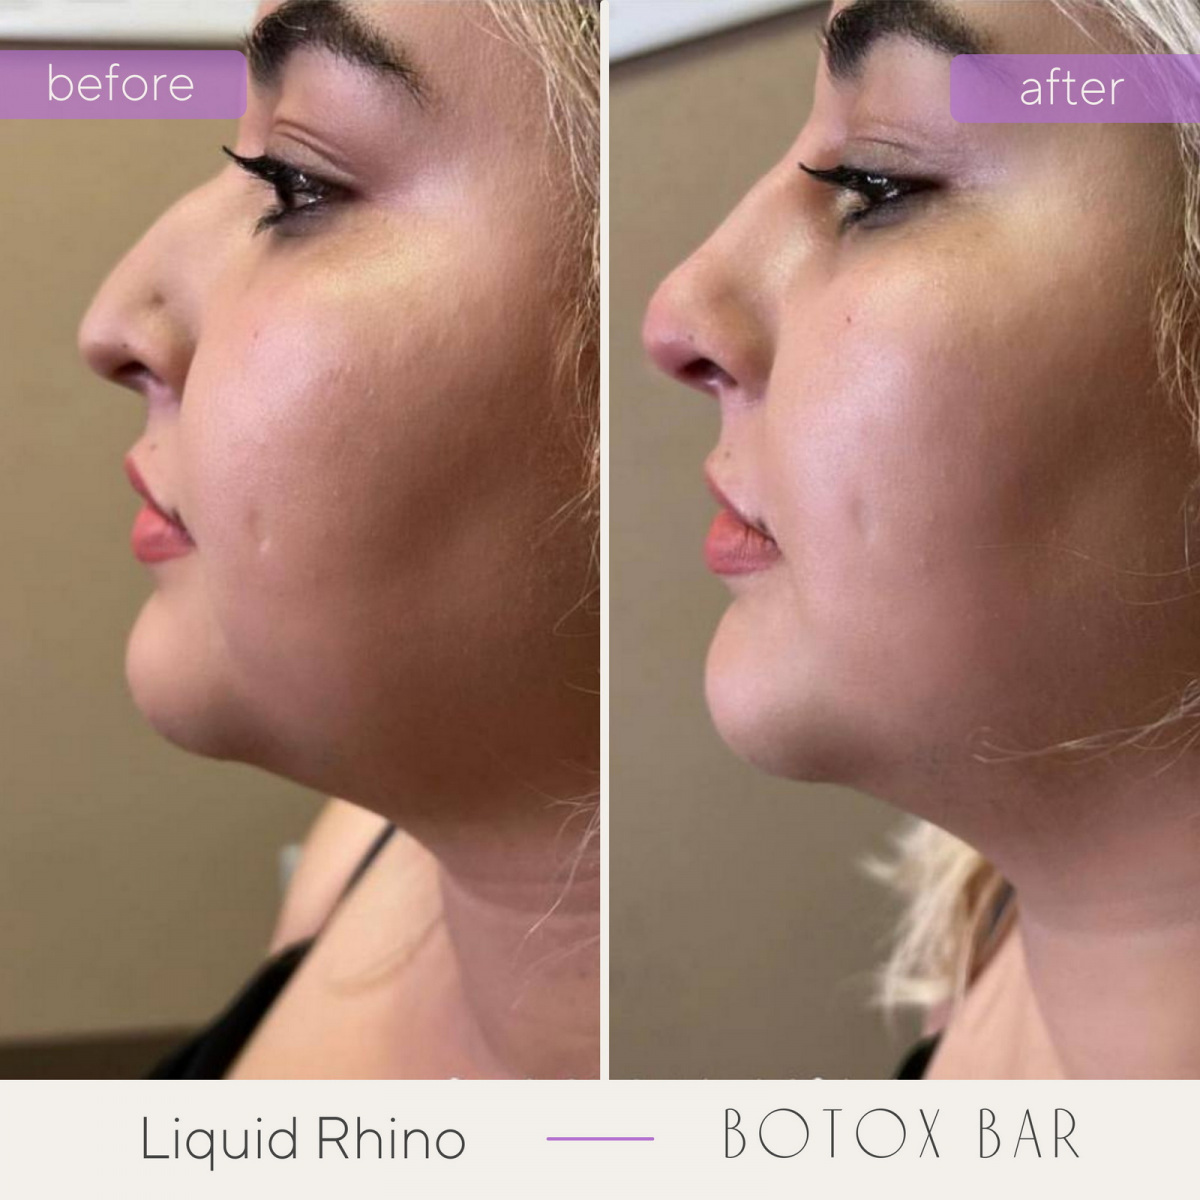 Before and After Liquid Rhino in The Botox Bar and Aesthetics at Dallas & Sherman, TX